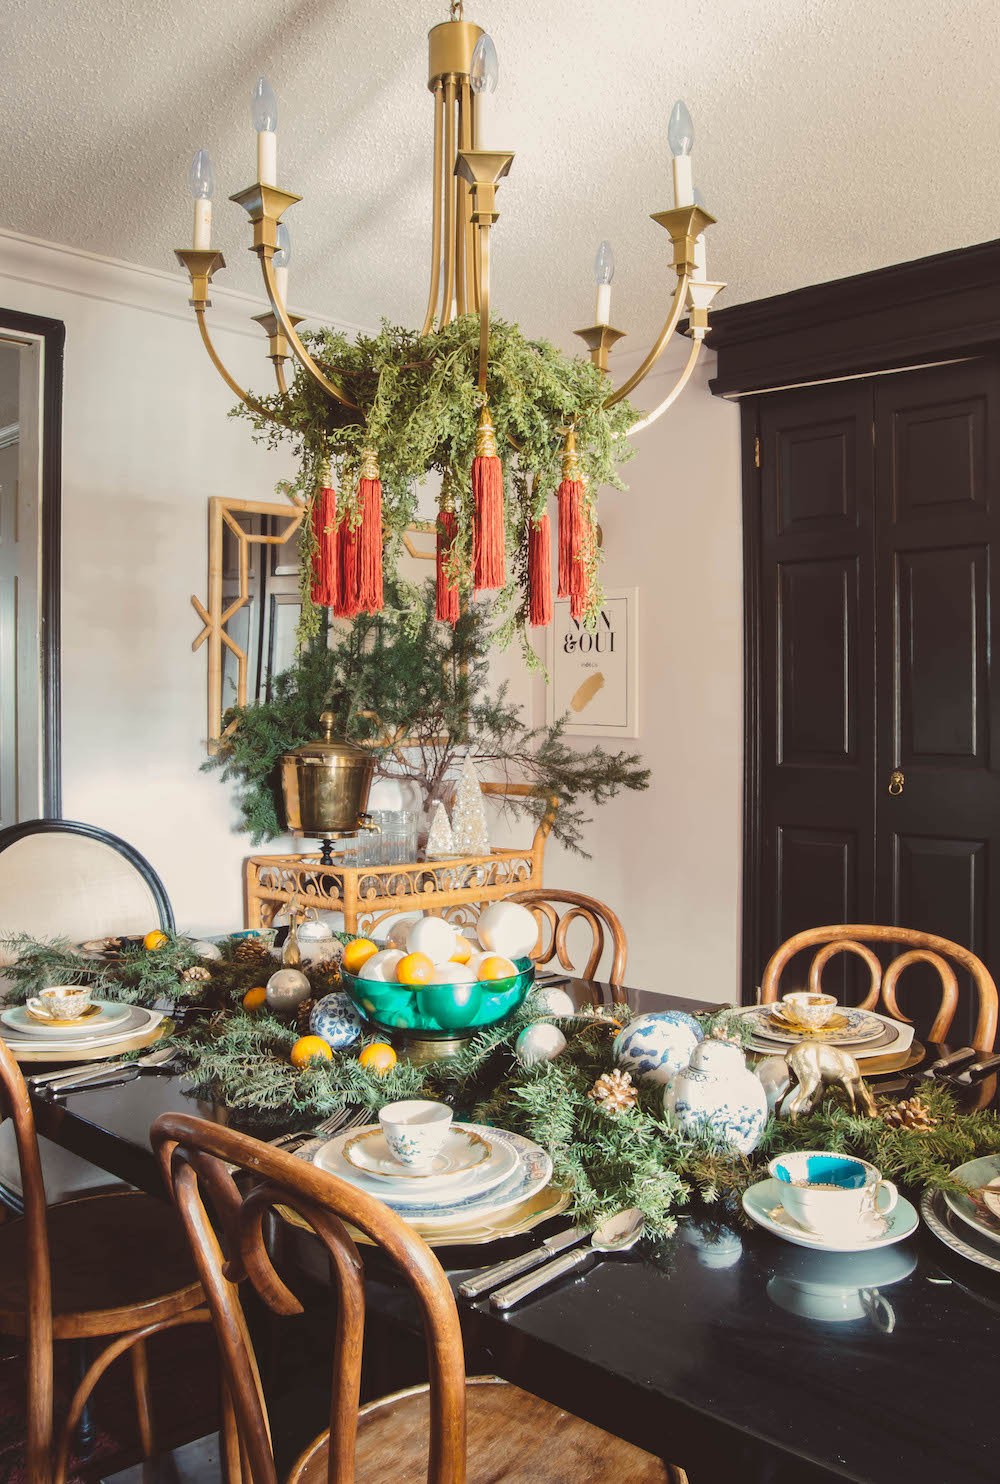 Orange-Christmas-via domicile.37.com - orange with yellow blues and greens holiday tabletop